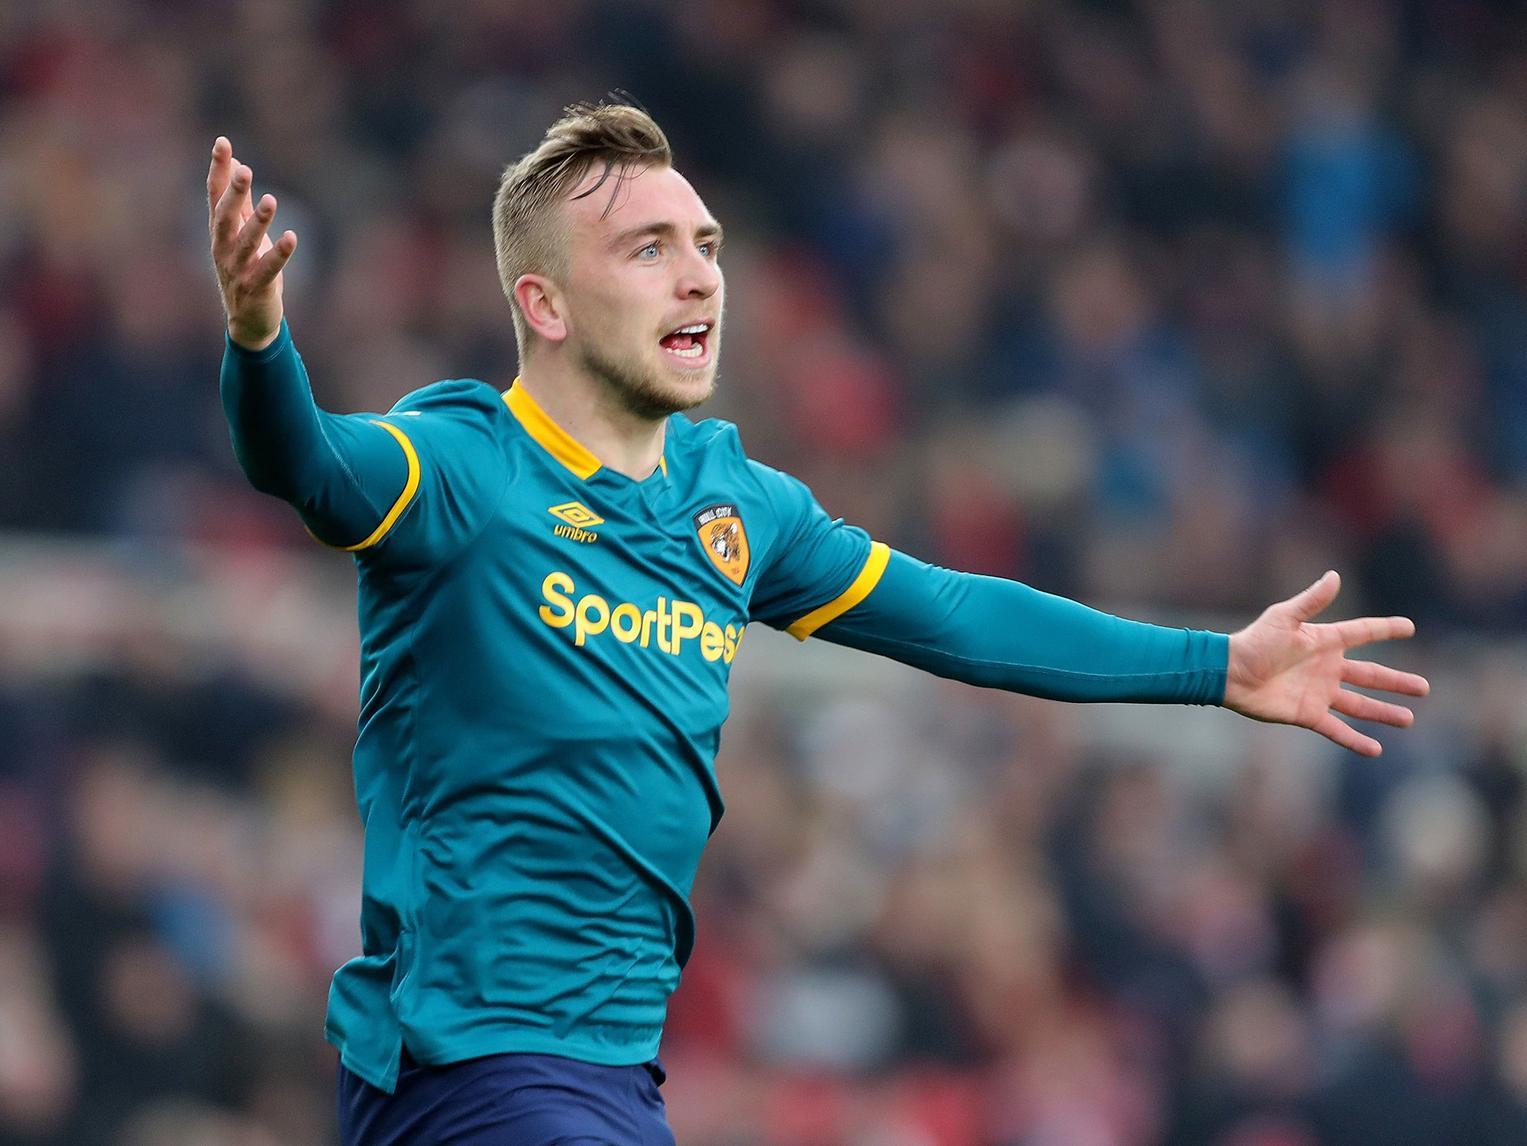 Stoke City midfielder Sam Clucas believes stopping former teammate Jarrod Bowen holds the key to the relegation-threatened Potters earning a result against one of the leagues in-form sides.